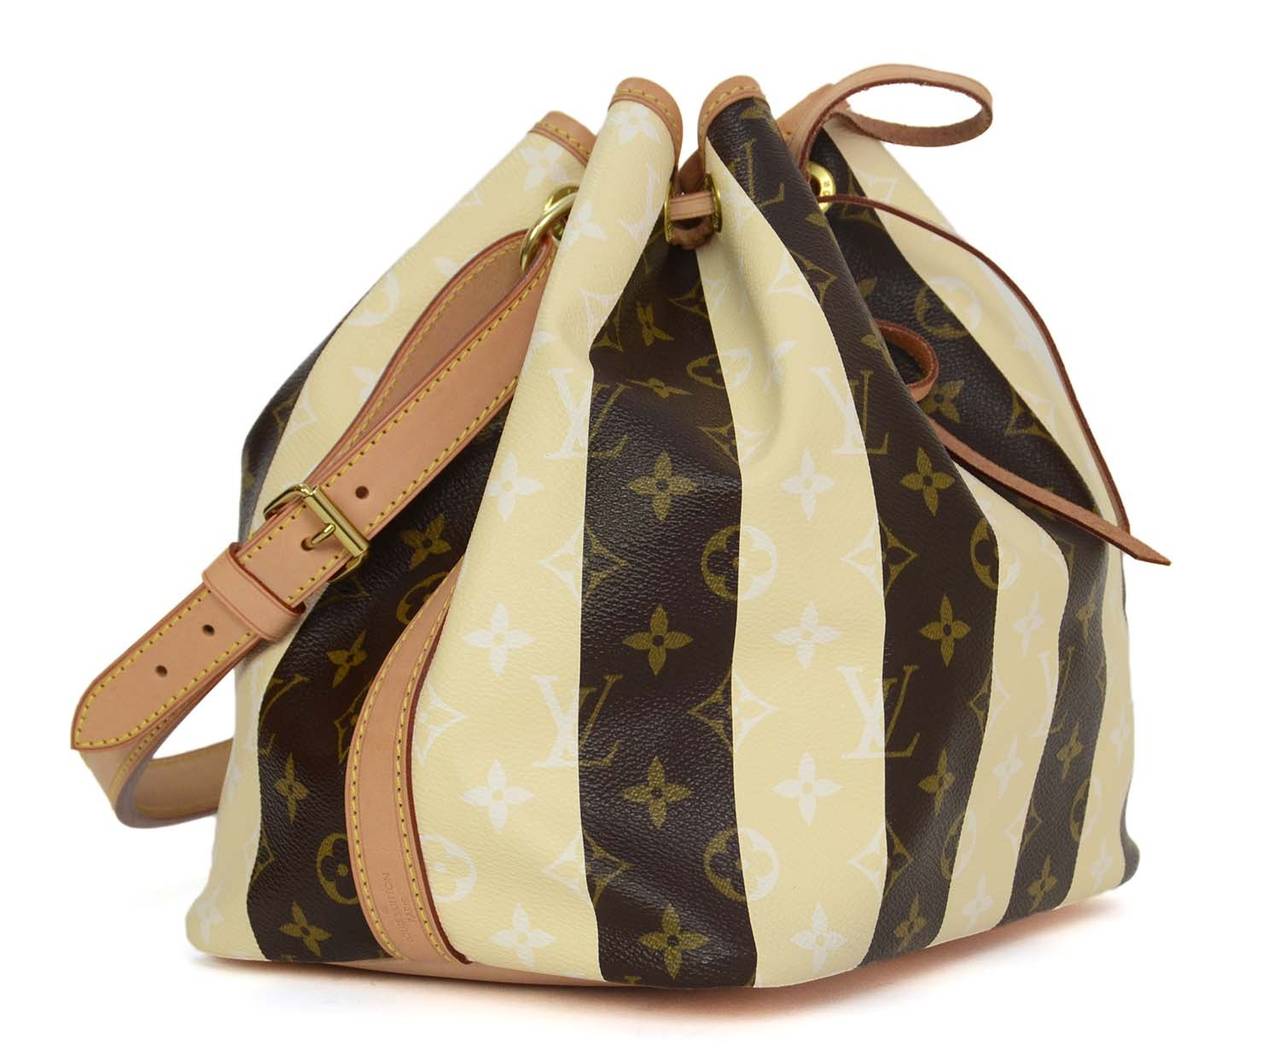 Louis Vuitton Monogram Rayures Canvas Ltd Ed. Noe Bag
Made in: France
Year of Production: 2011
Color: Brown, tan, ivory and gold
Hardware: Goldtone
Materials: Coated canvas, leather and metal
Lining: Ivory striped textile
Closure/opening: